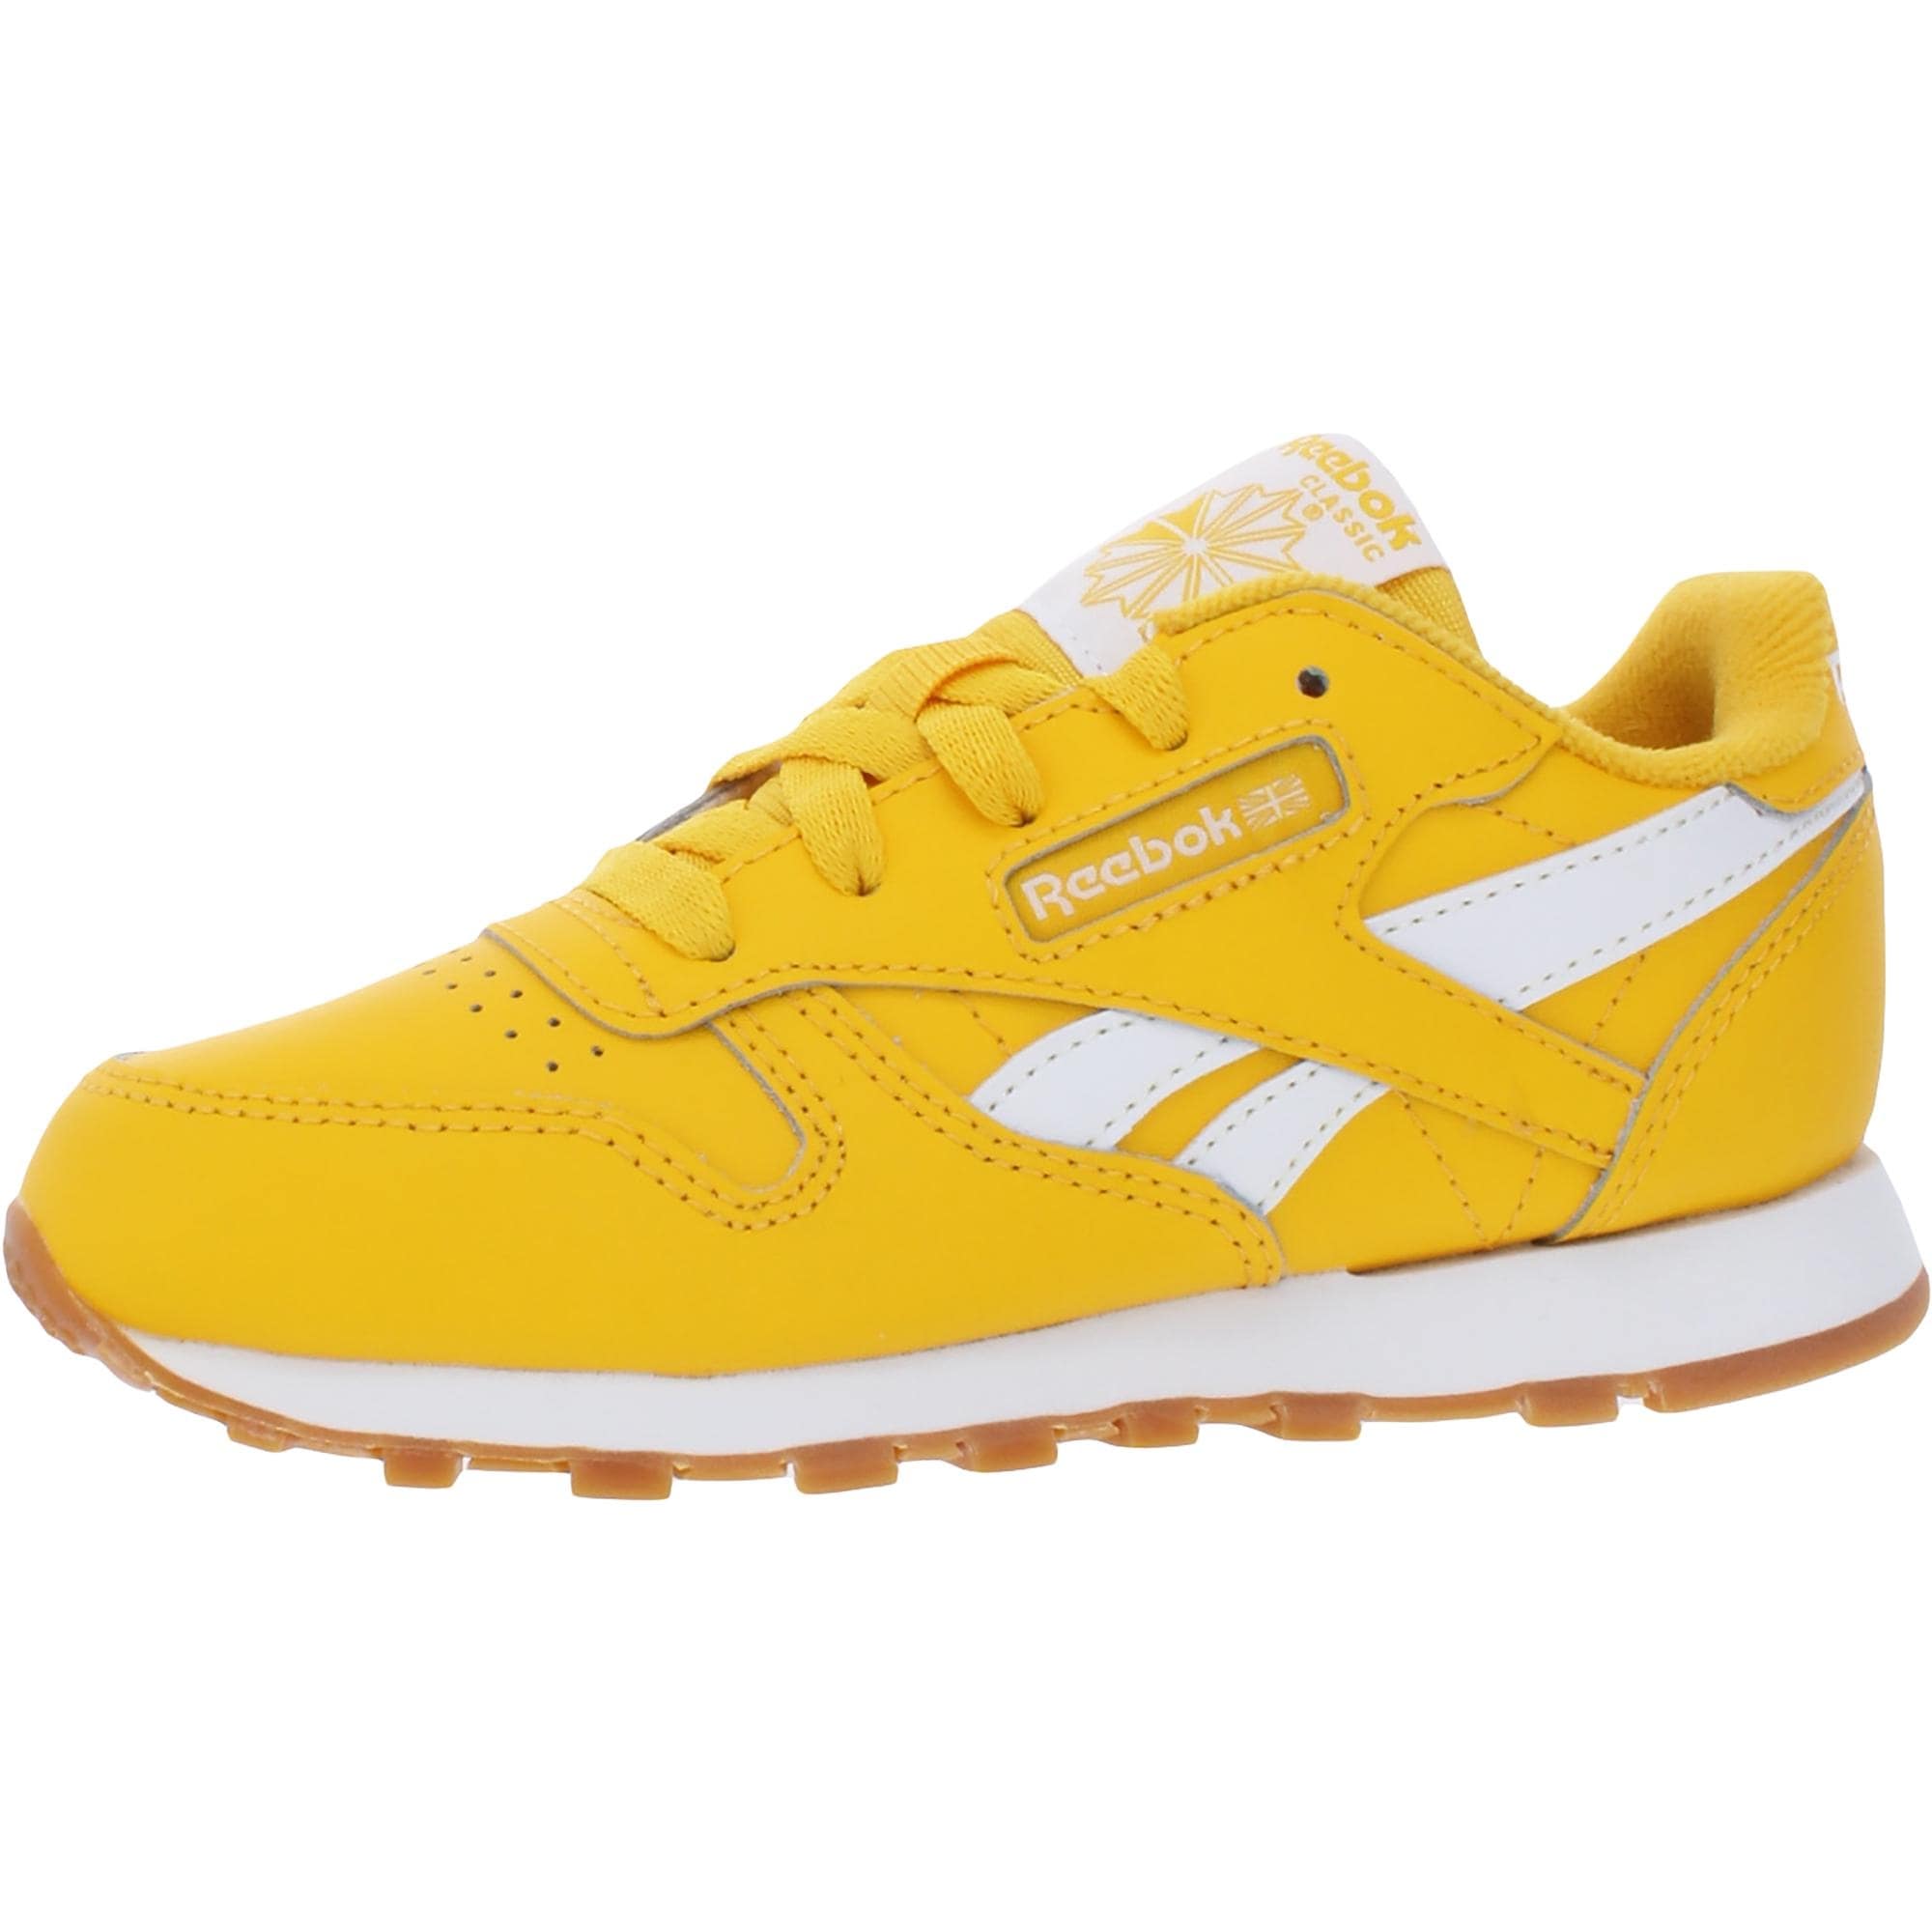 Reebok Leather Running Shoes Gym Exercise - Yellow/Toxic Yellow/White - Overstock -